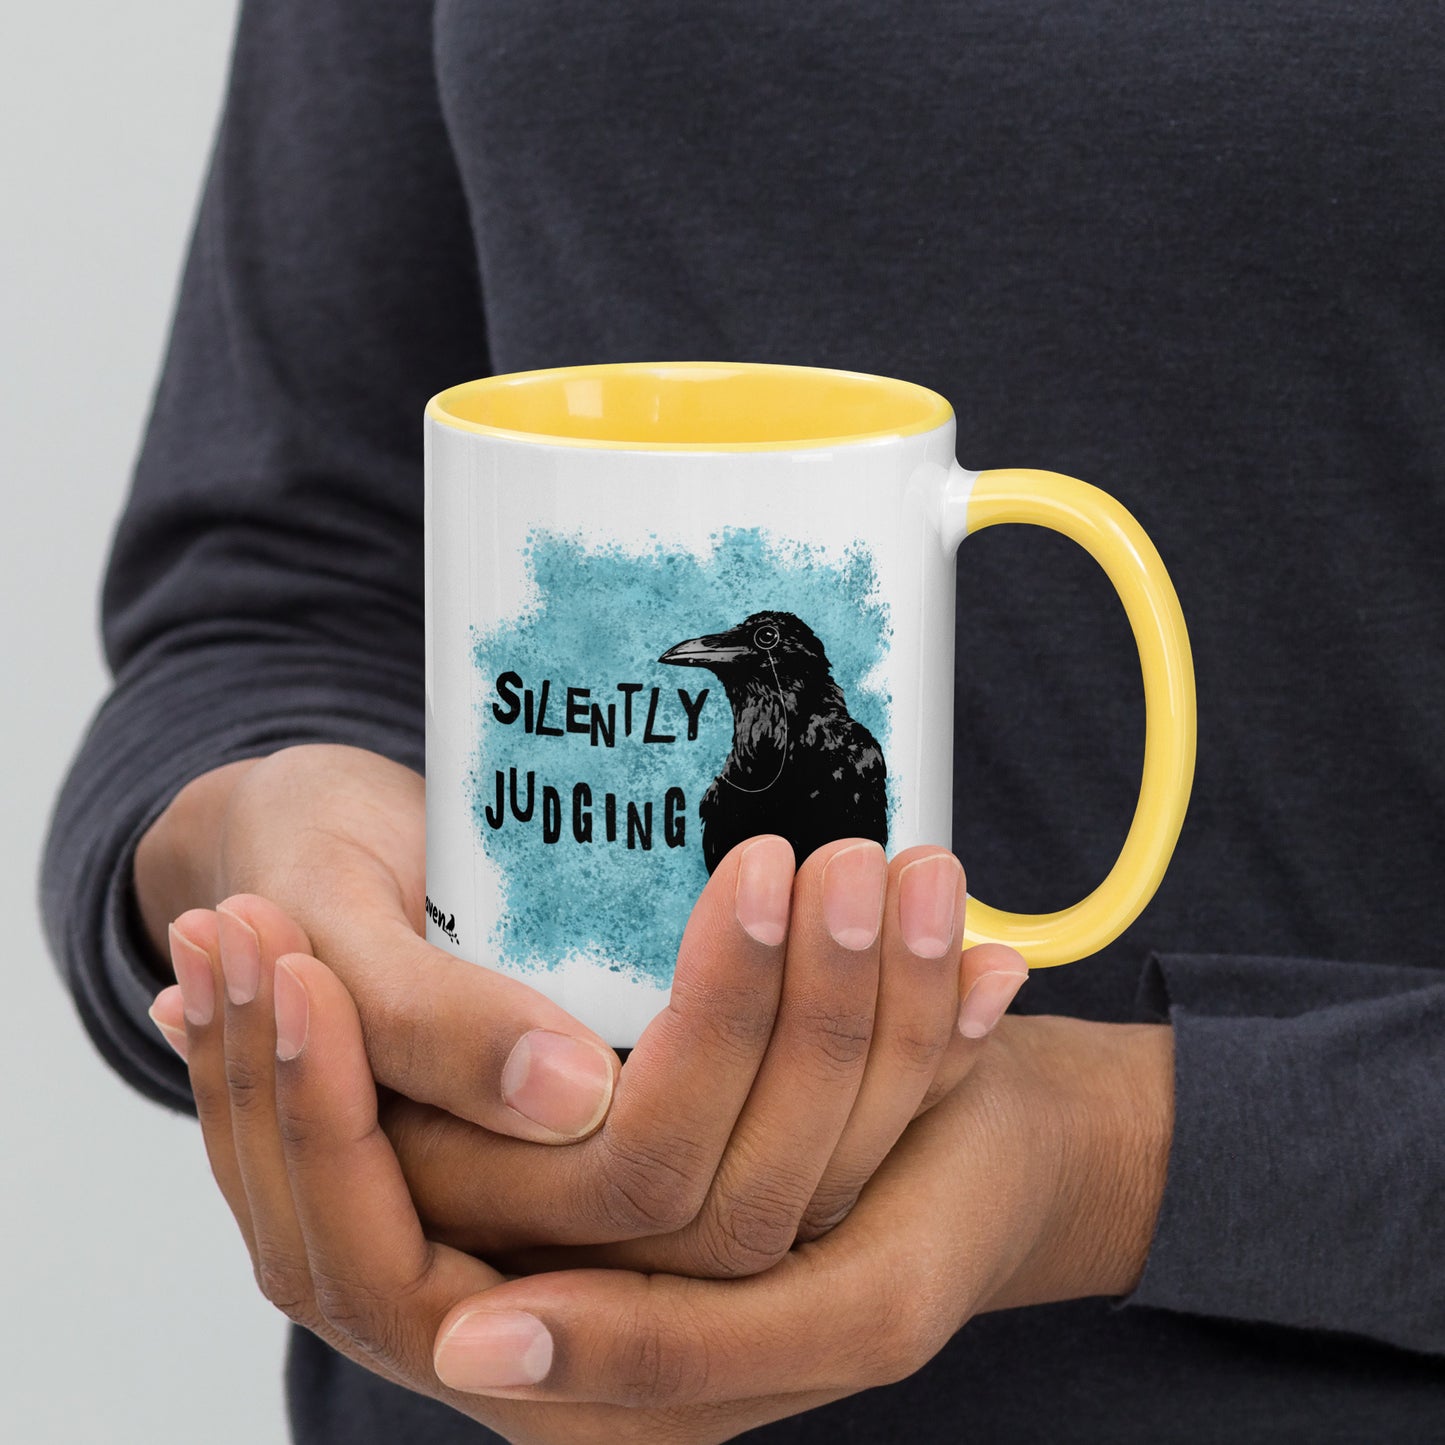 11 ounce ceramic mug with Silently Judging text next to a monacle-wearing crow on blue paint splatters. Double-sided design. Mug has yelllow rim, handle, and inside. Shown in the hands of a model.